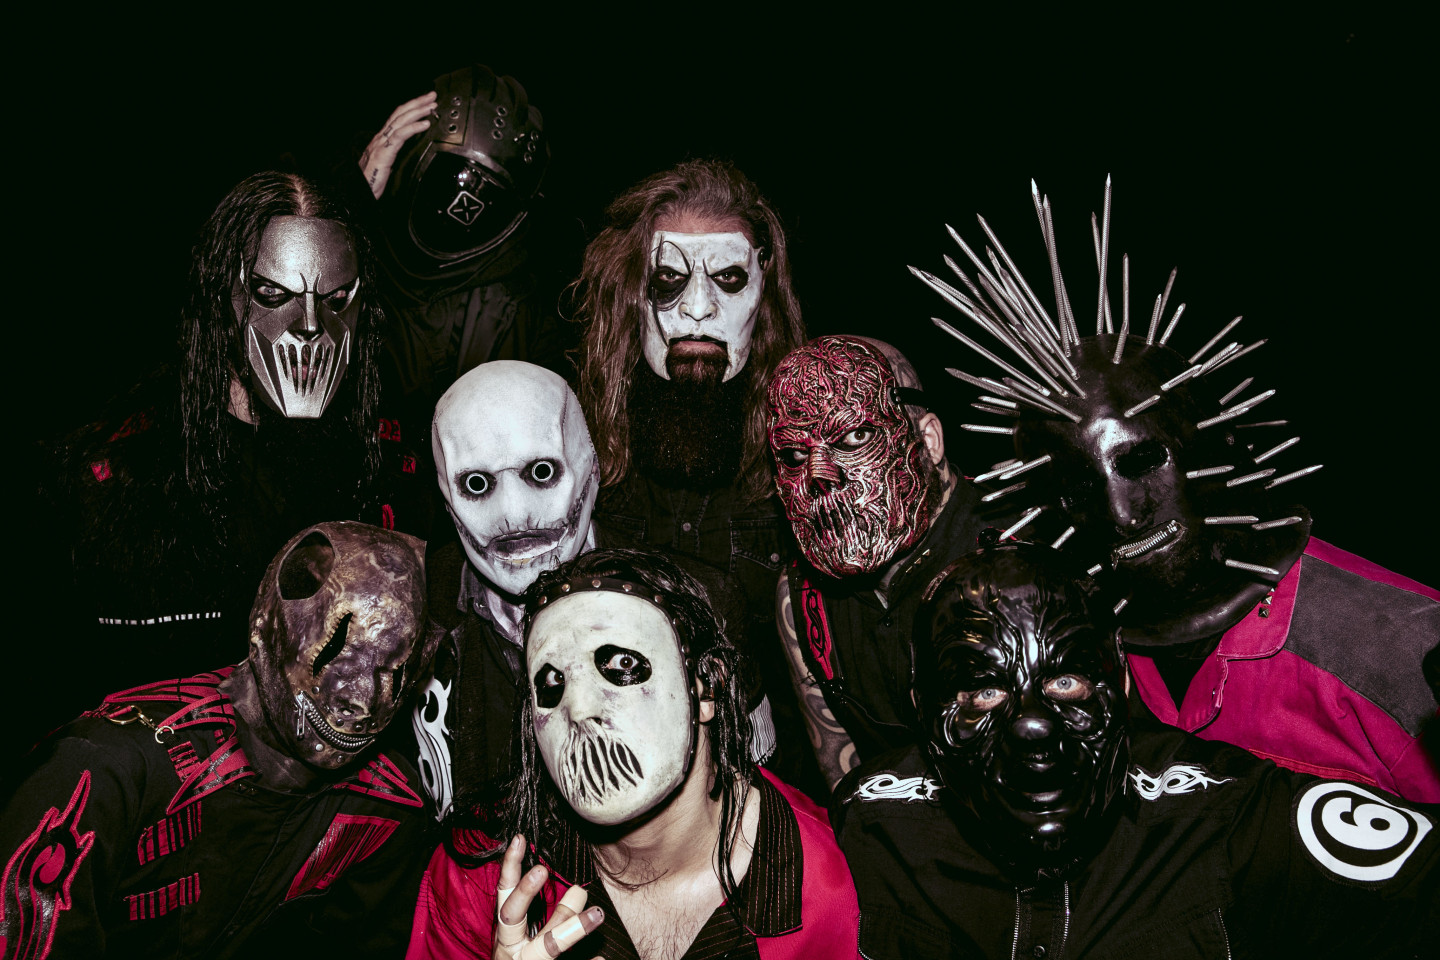 Slipknot’s search for something beautiful is always heavy